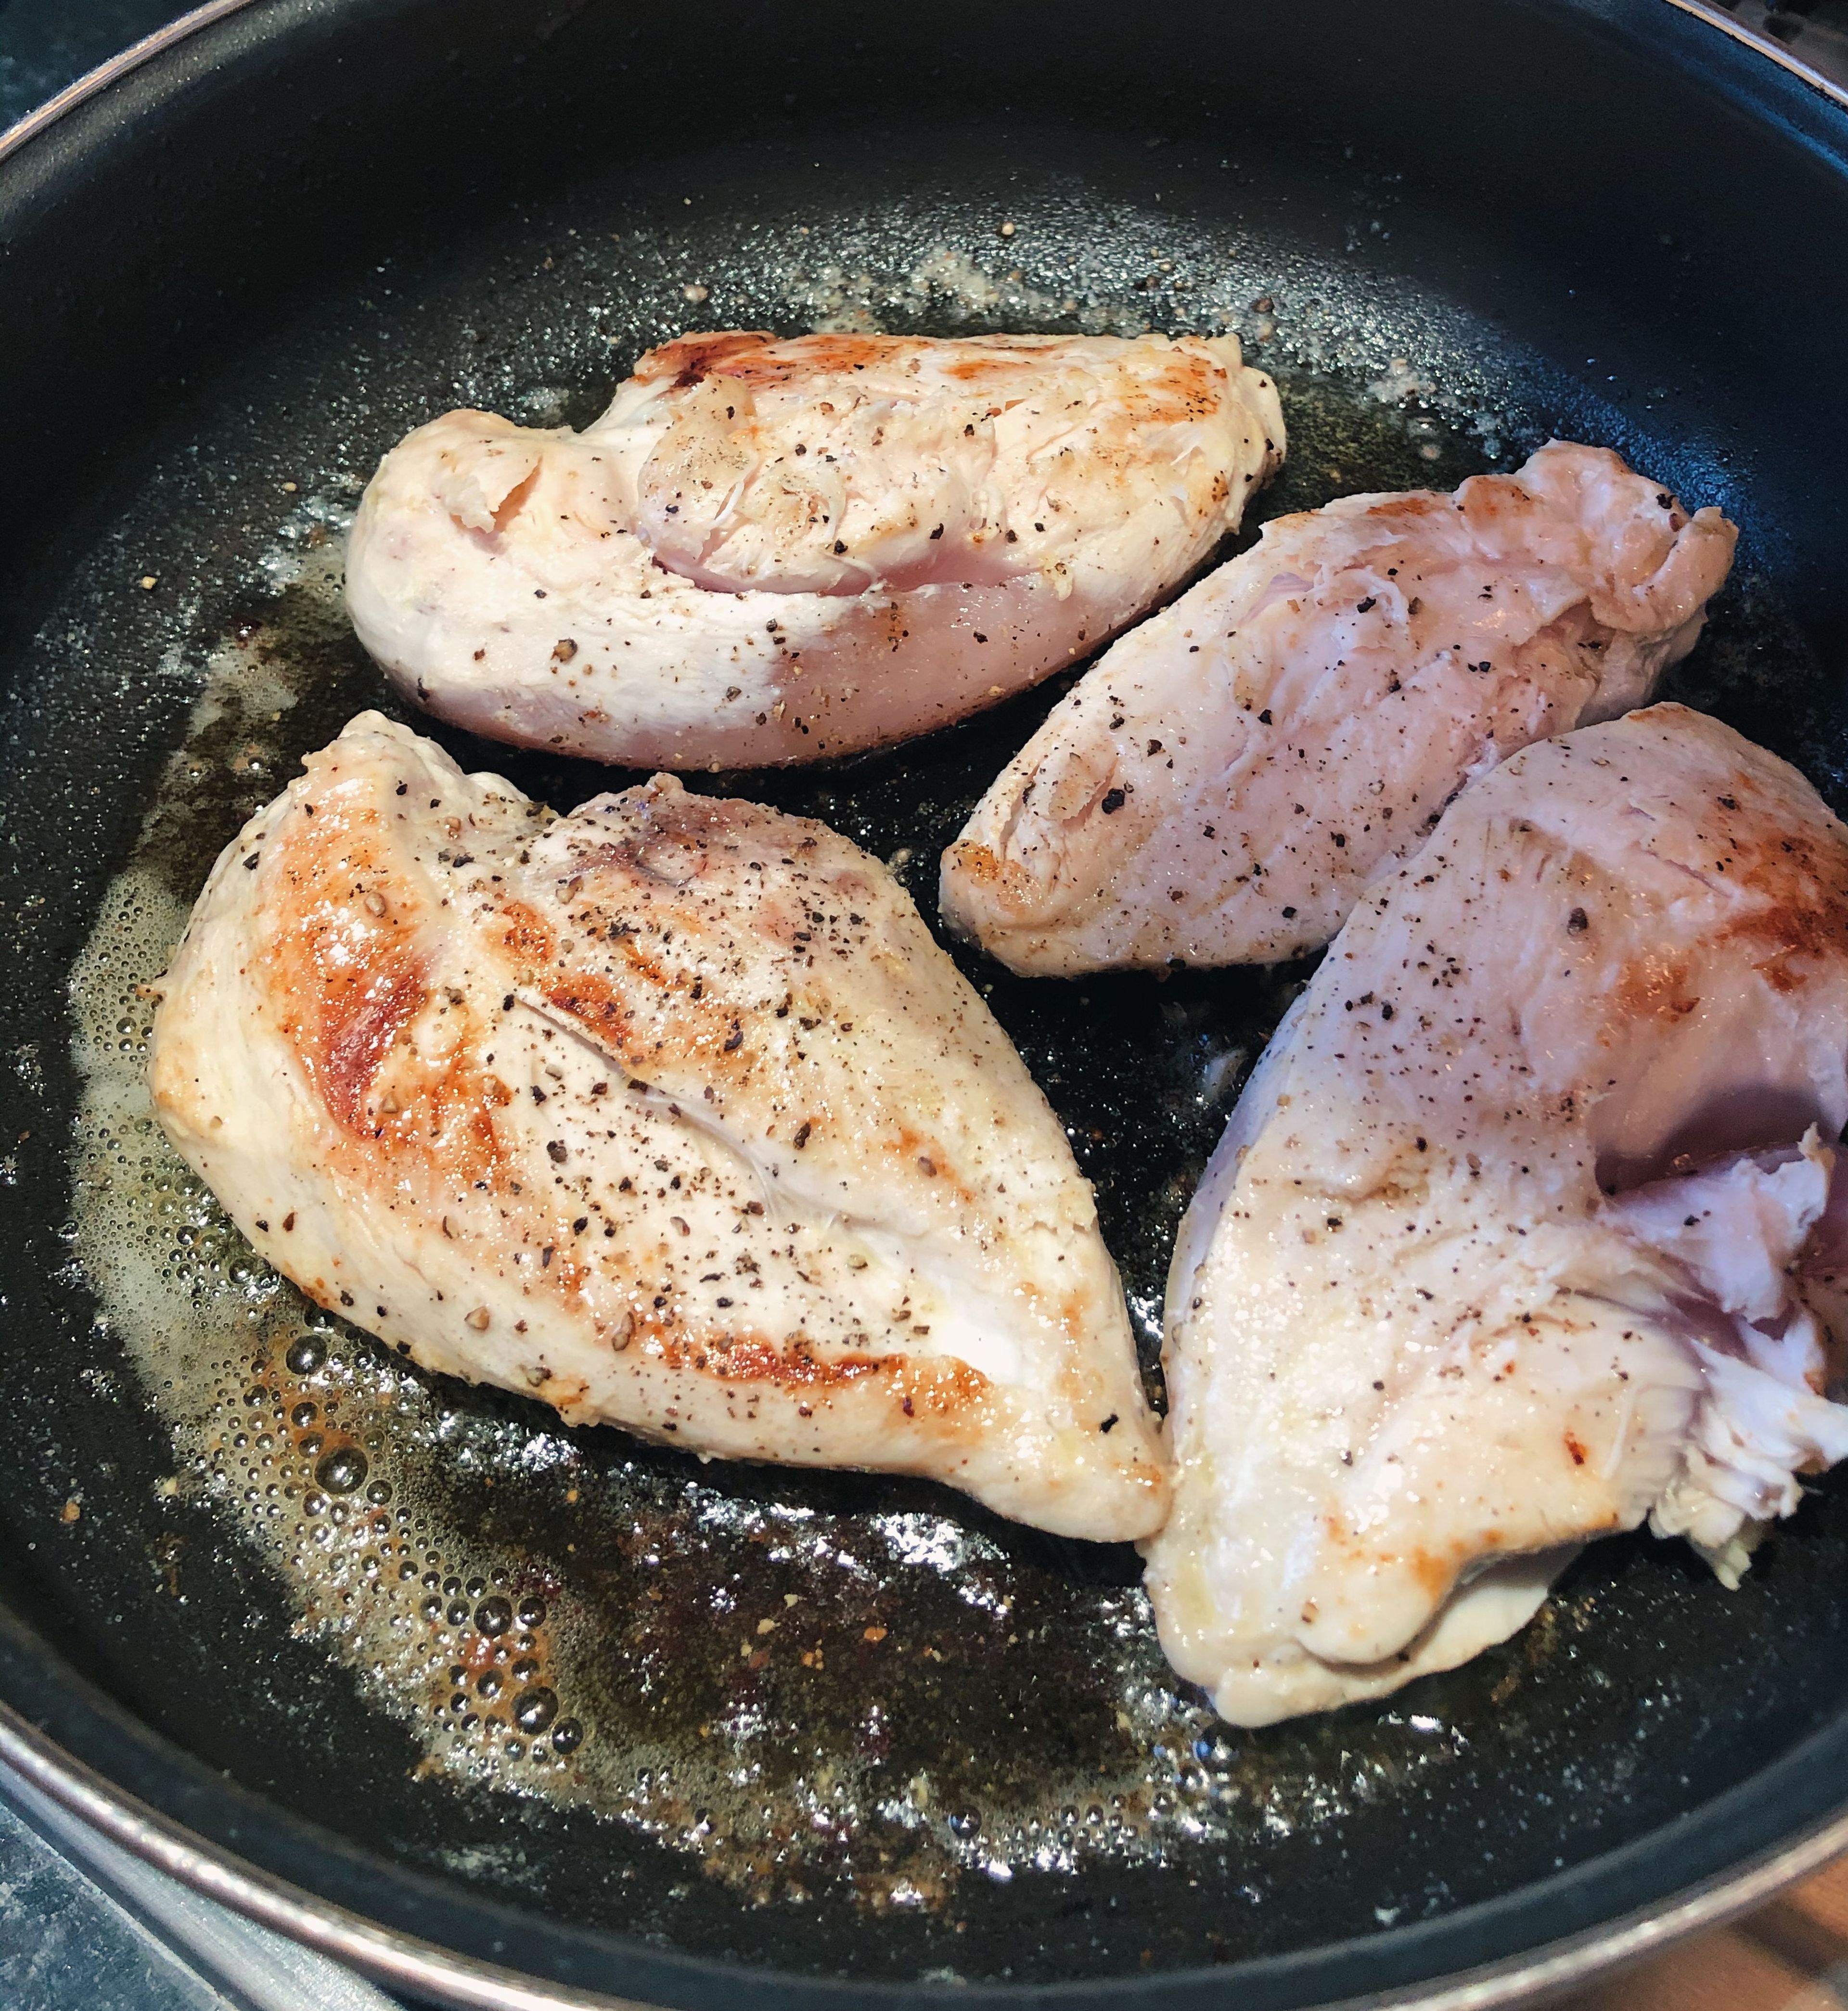 Season and fry off chicken breast for 4 minutes each side